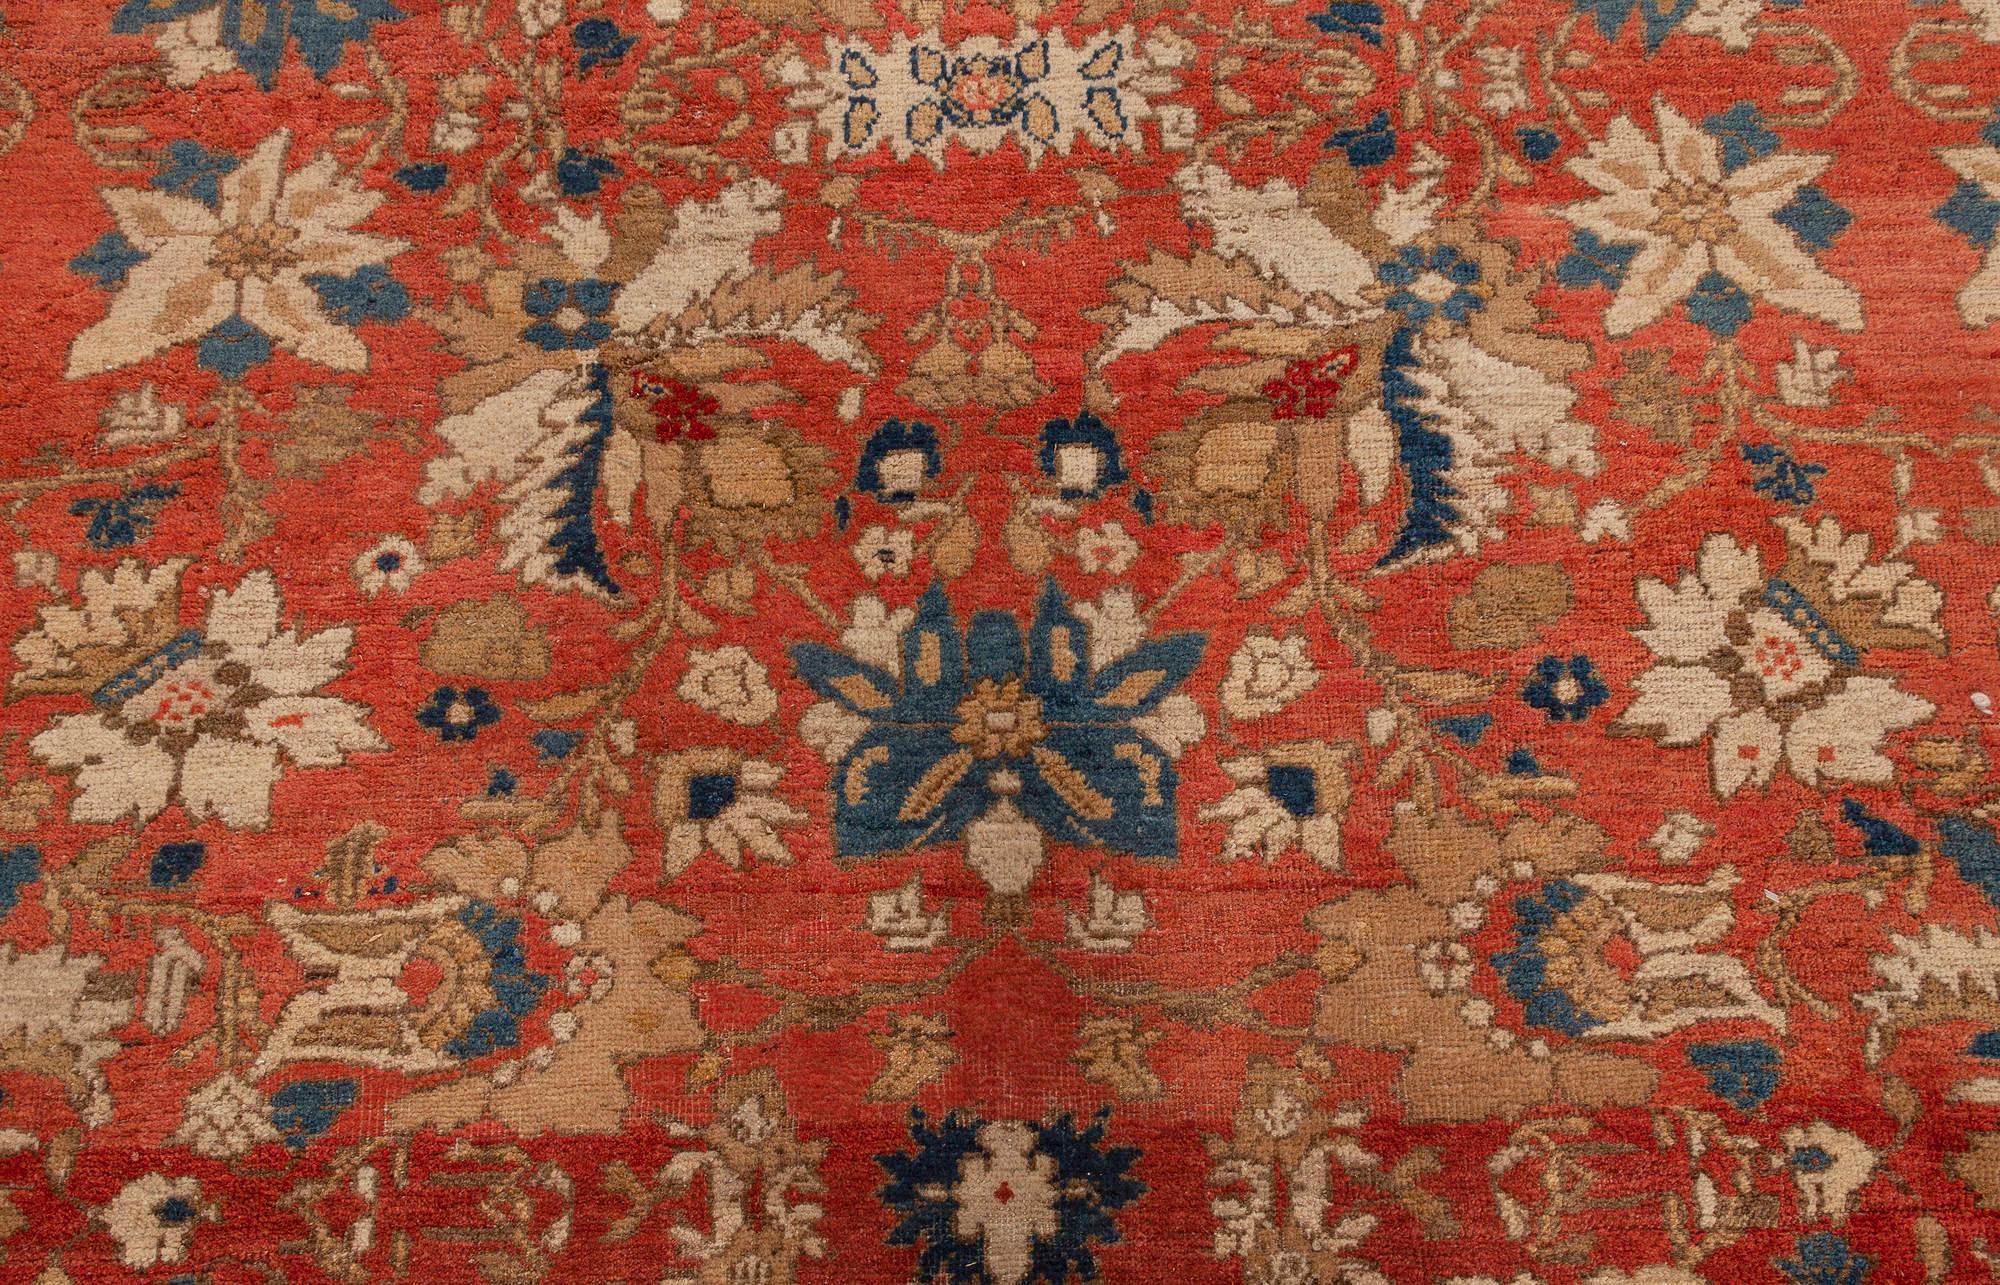 Antique Persian Sultanabad floral red blue handmade wool rug
Size: 10'3